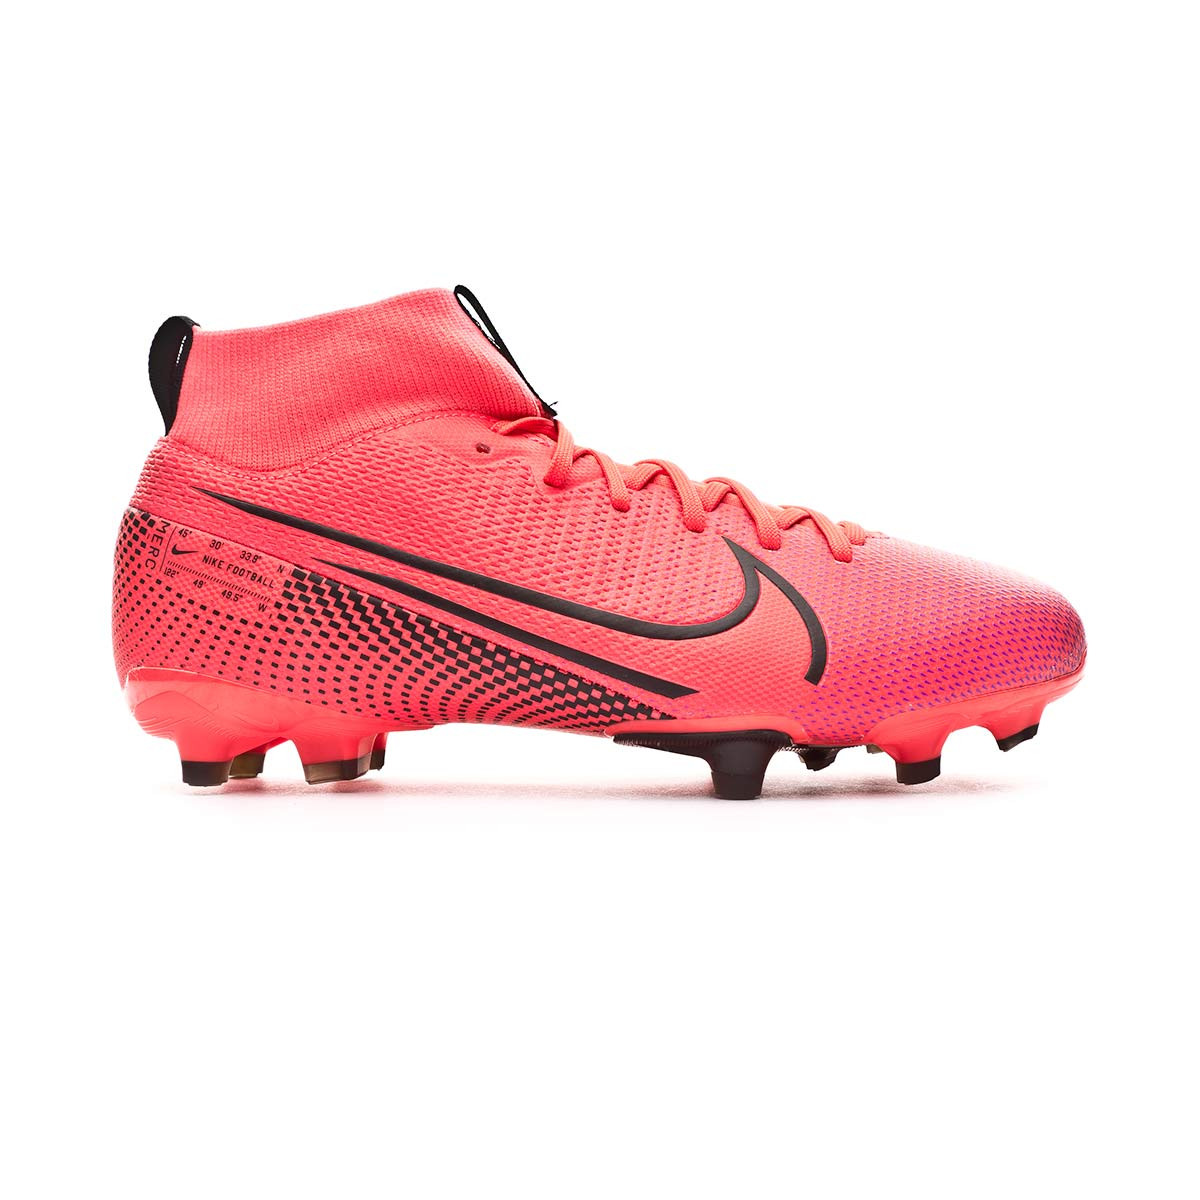 Nike Mercurial Superfly 7 Academy FG MG M AT7946 010.